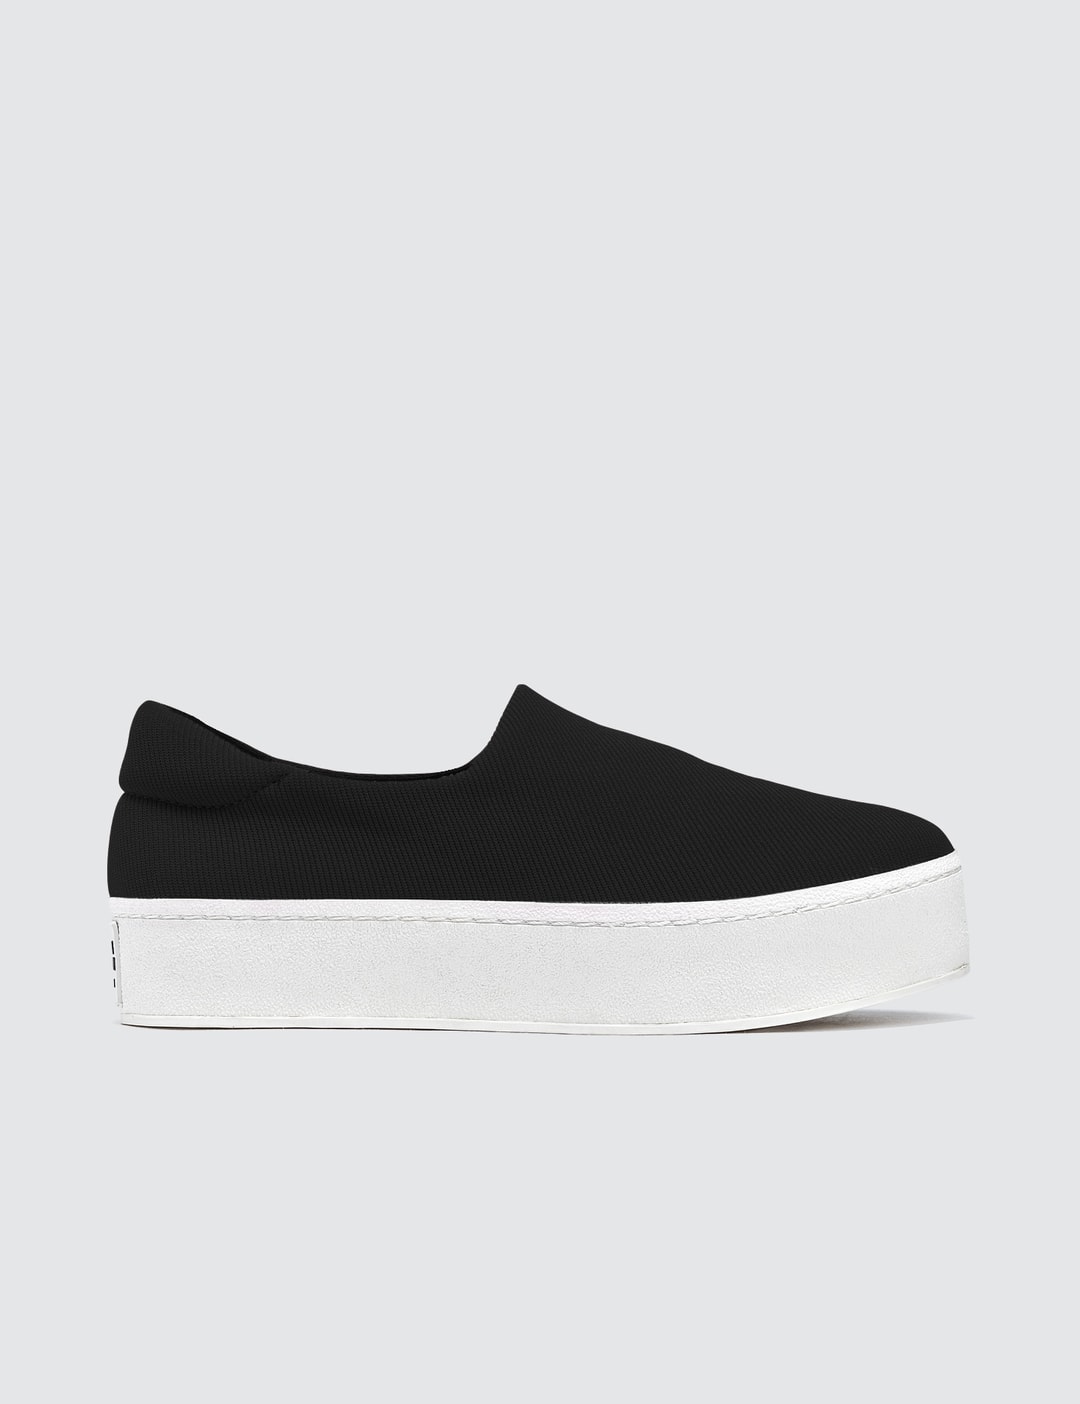 Opening Ceremony - Cici Classic Slip-on | HBX - Globally Curated ...